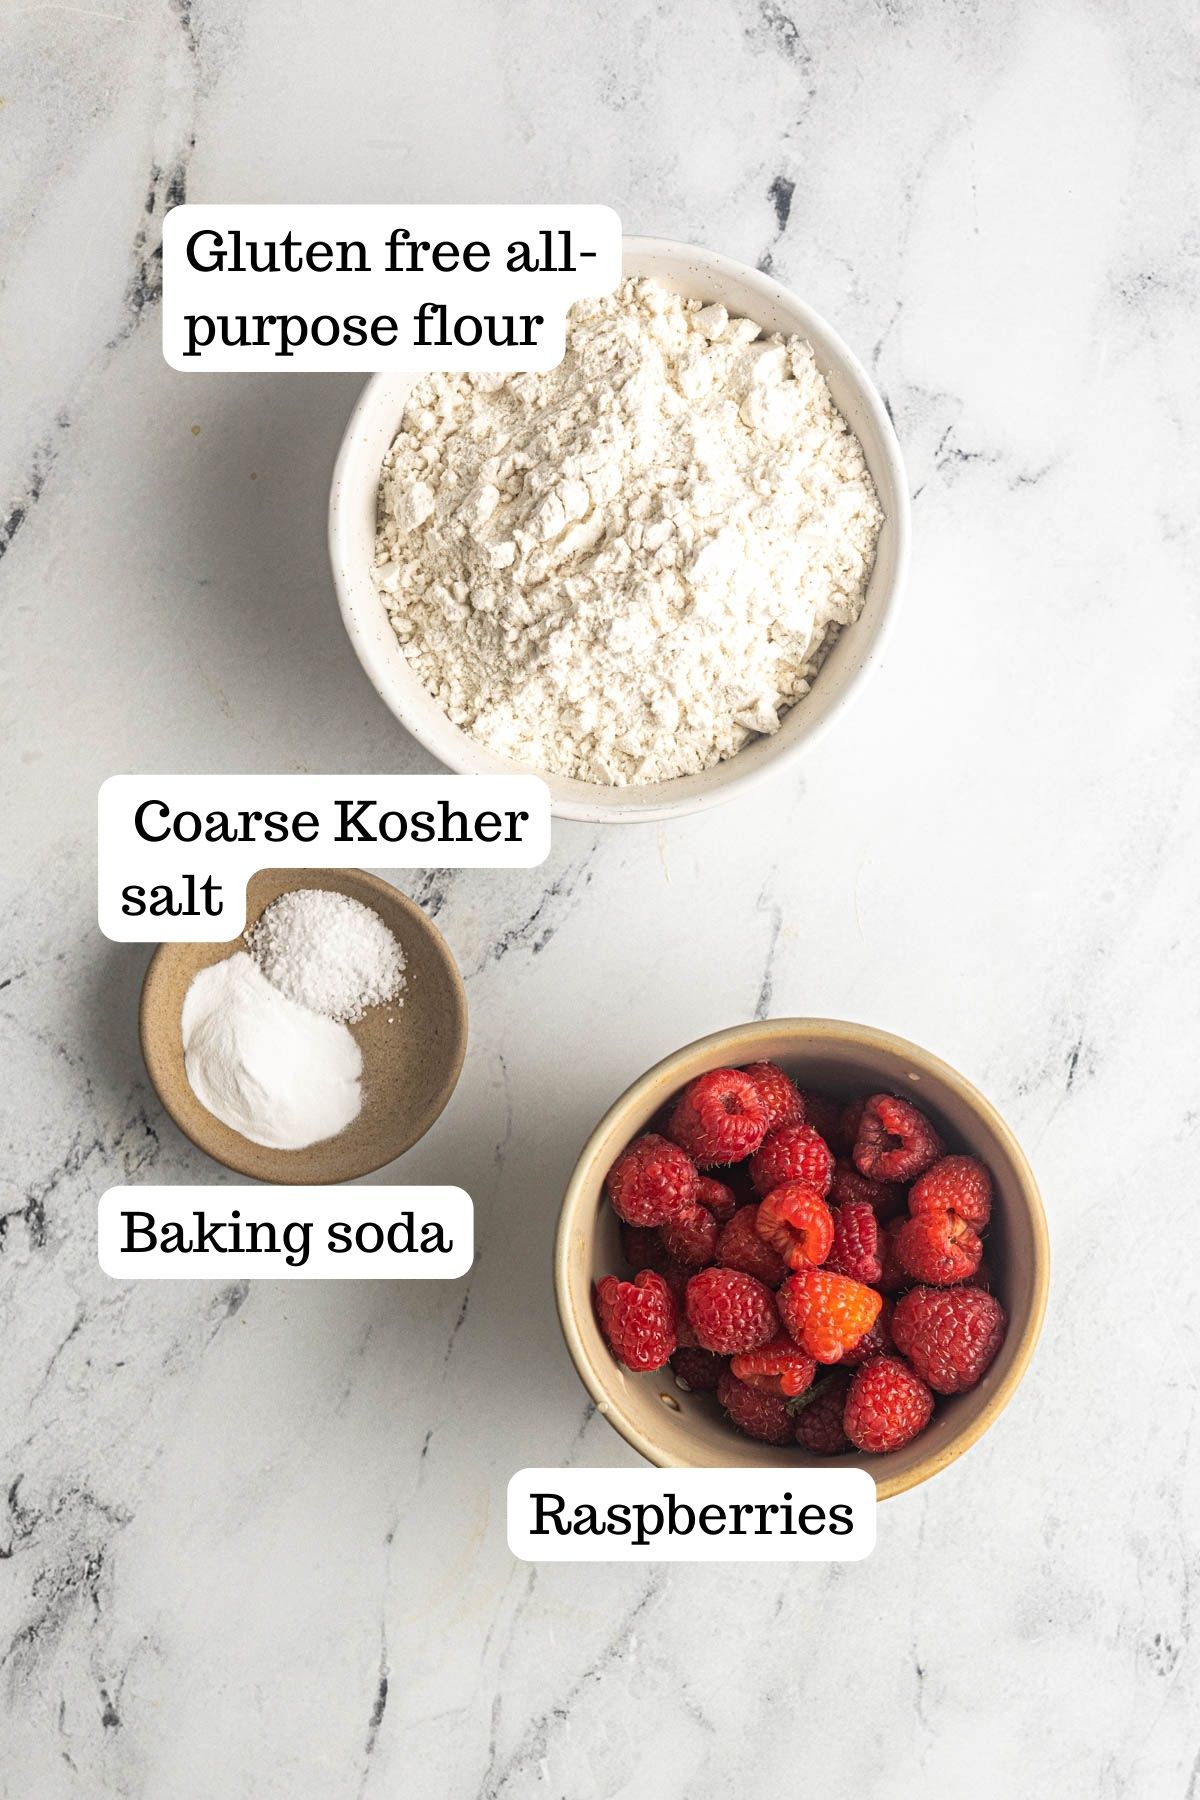 This image shows the dry ingredients for the Gluten Free Raspberry Muffins. The bowls are filled with Gluten free all-purpose flour, coarse Kosher salt, baking soda, and raspberries.